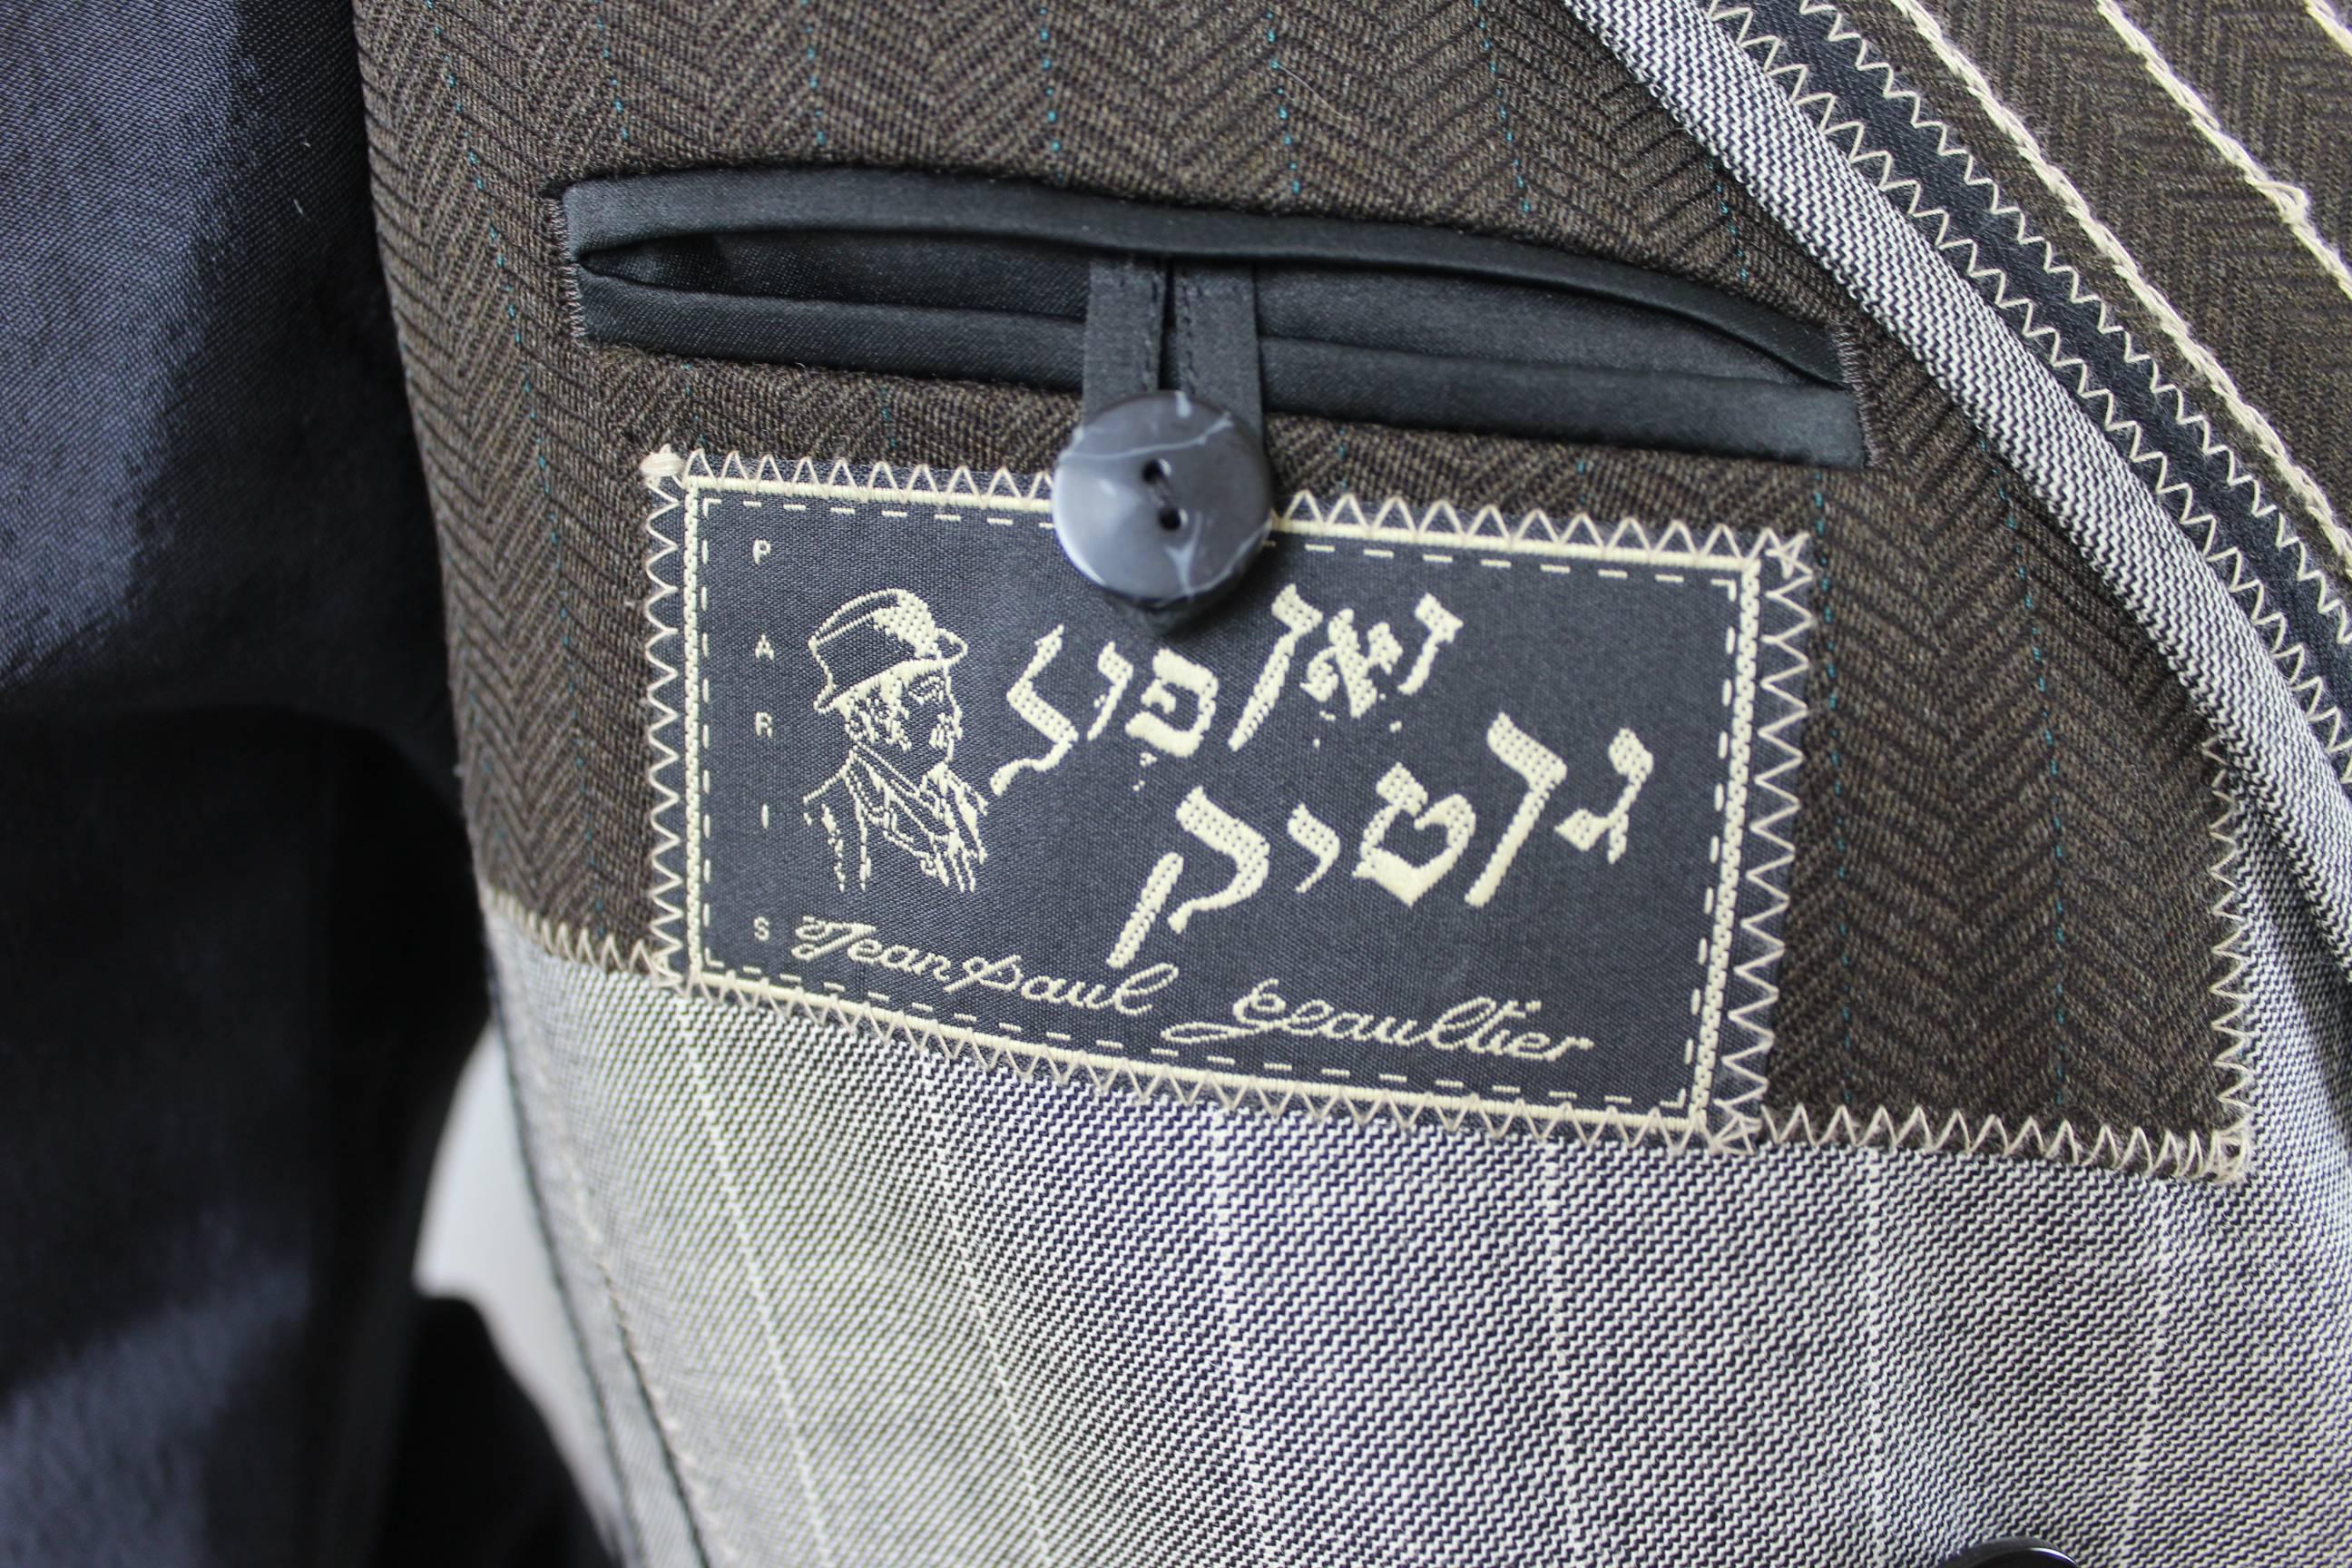 Jean Paul Gaultier 'Chic Rabbis' Collection A/W 1993-4 Jacket 4